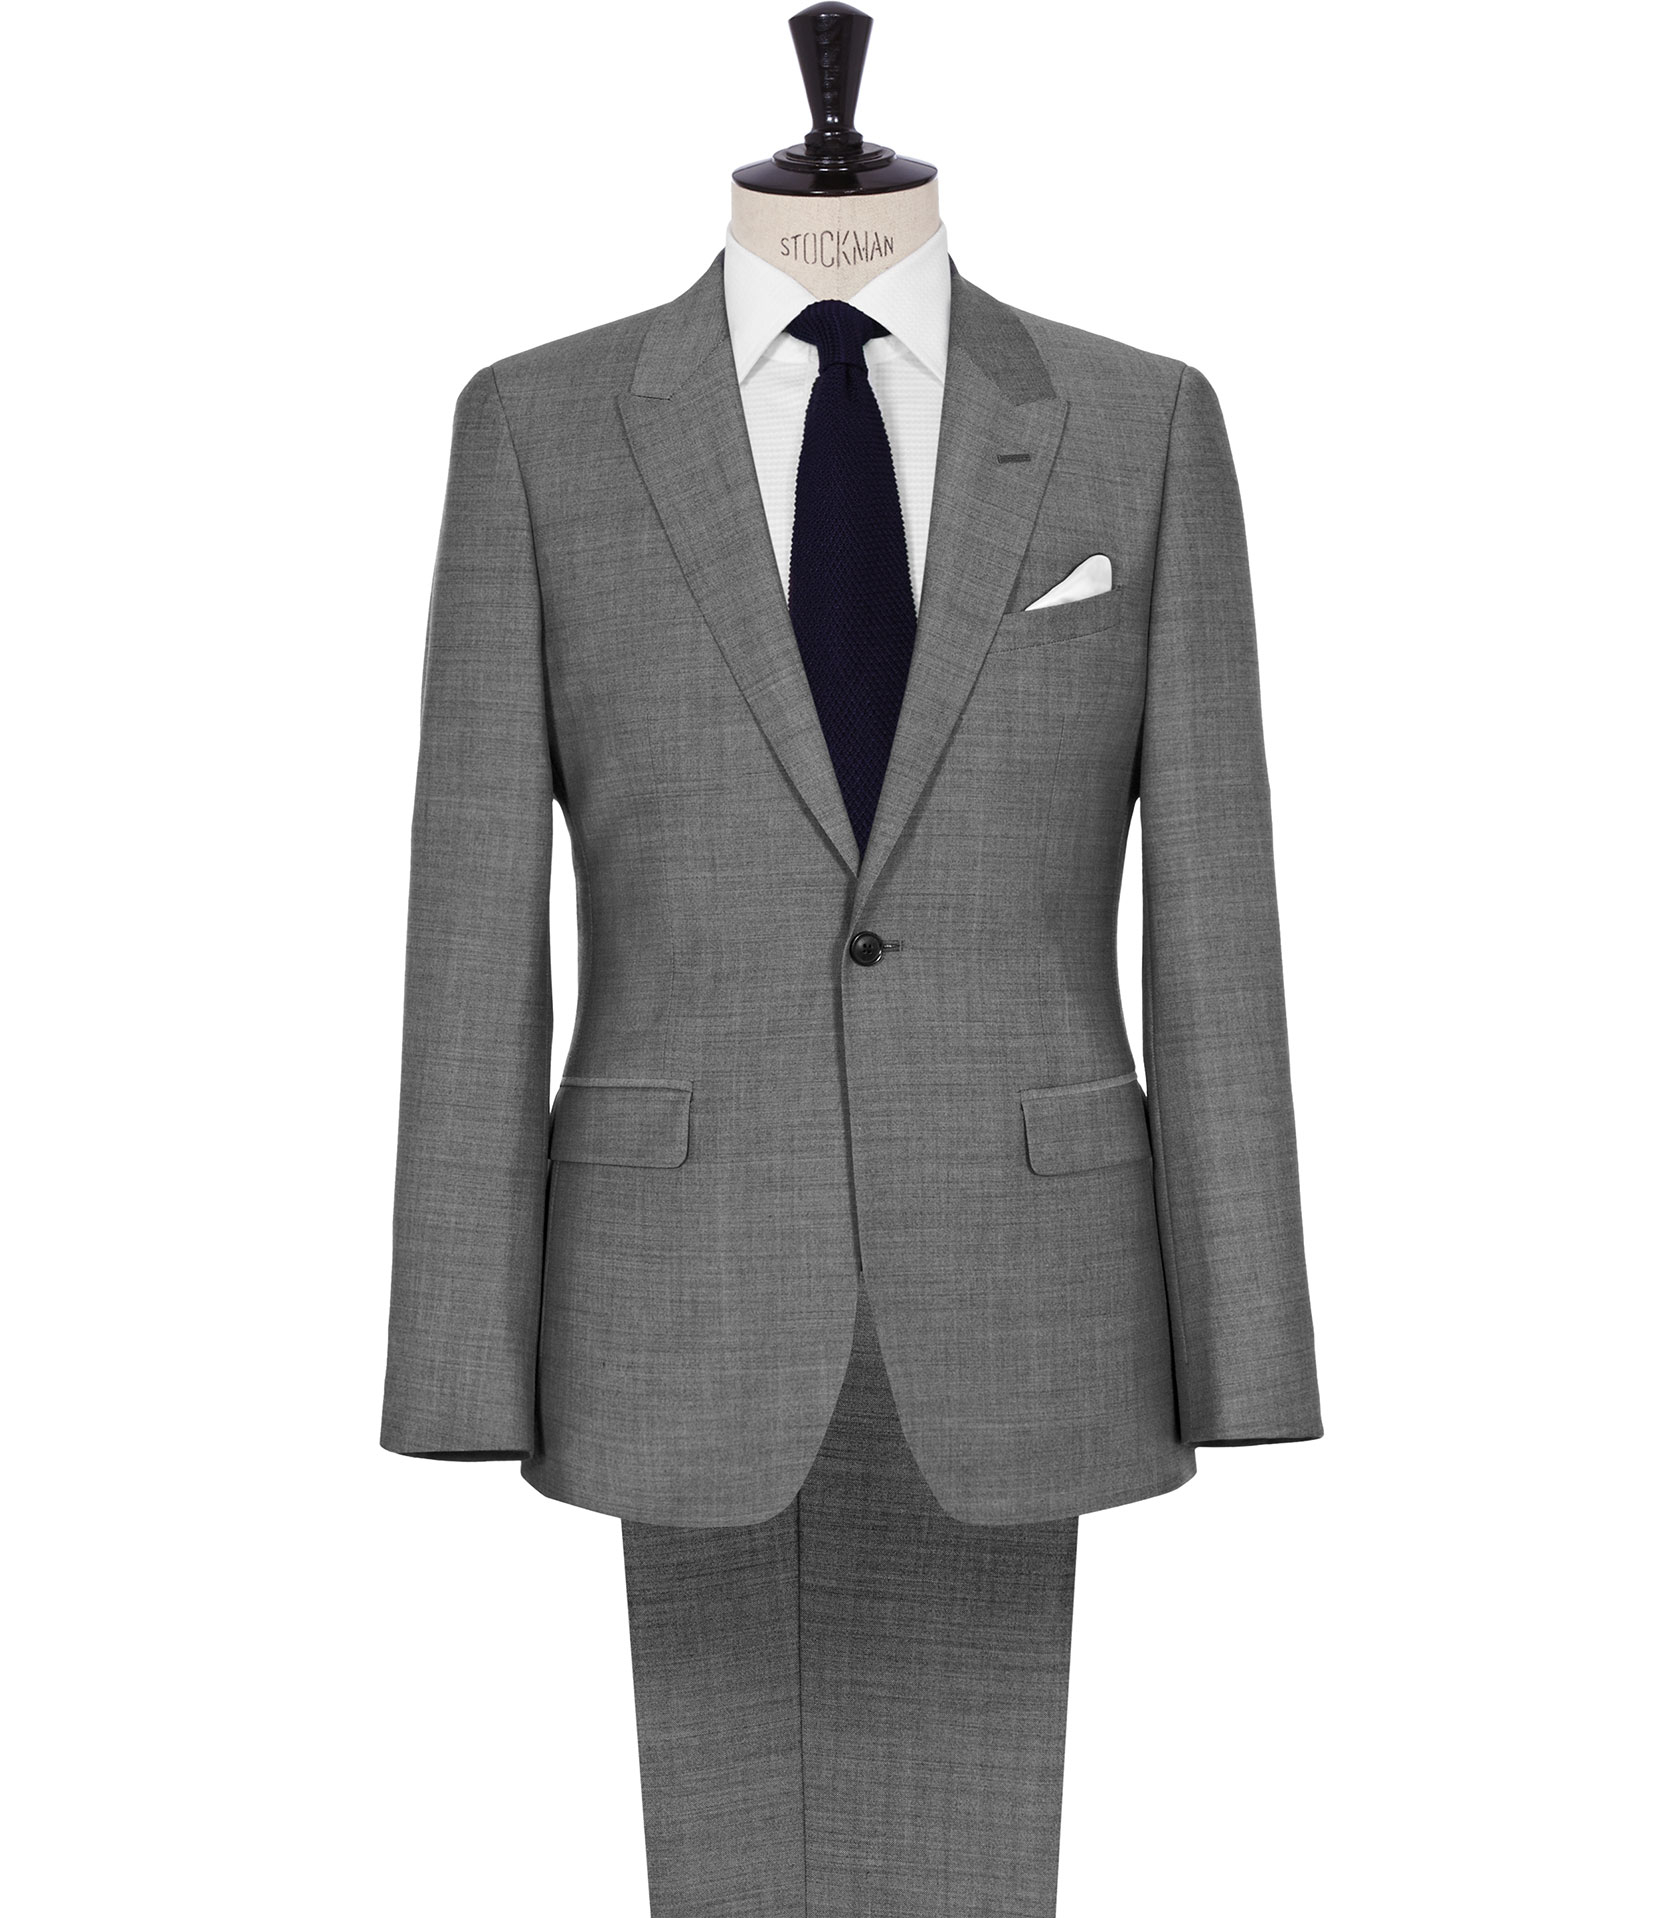 Lyst - Reiss Youngs One Button Peak Lapel Suit in Gray for Men